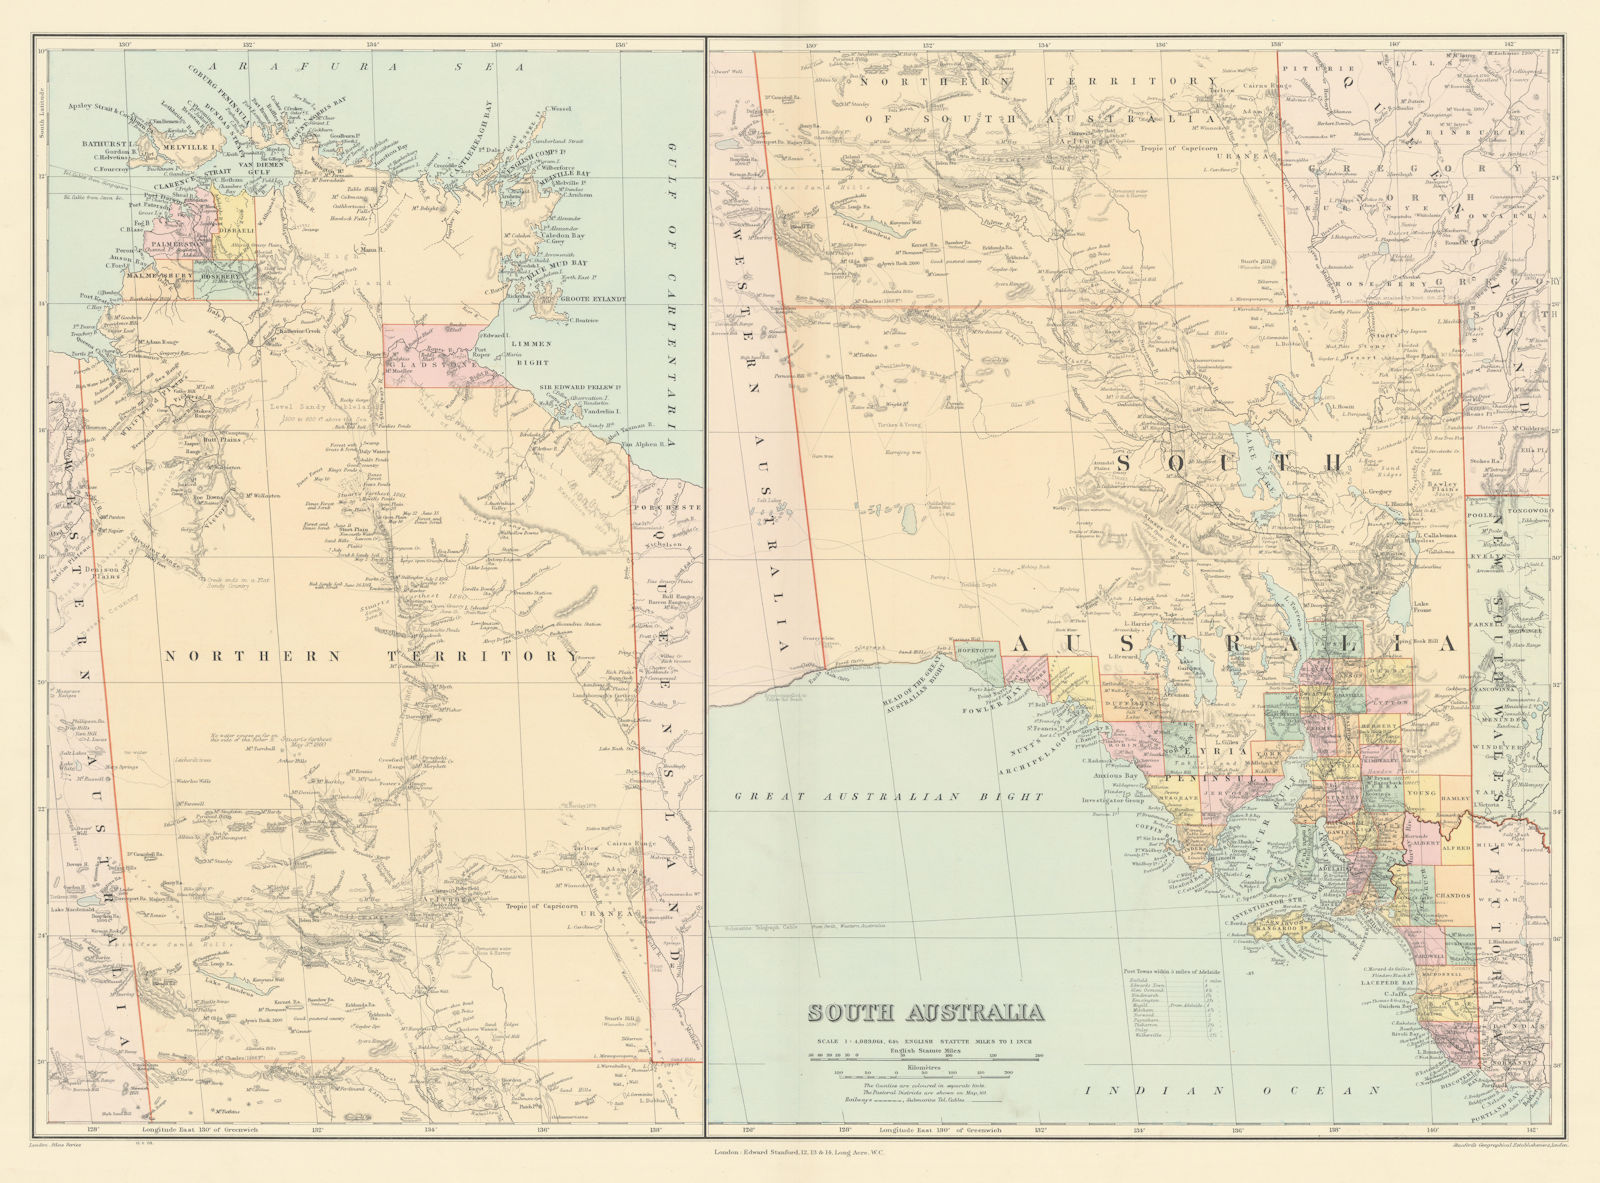 South Australia & Northern Territory. Explorers' routes. Large STANFORD 1904 map